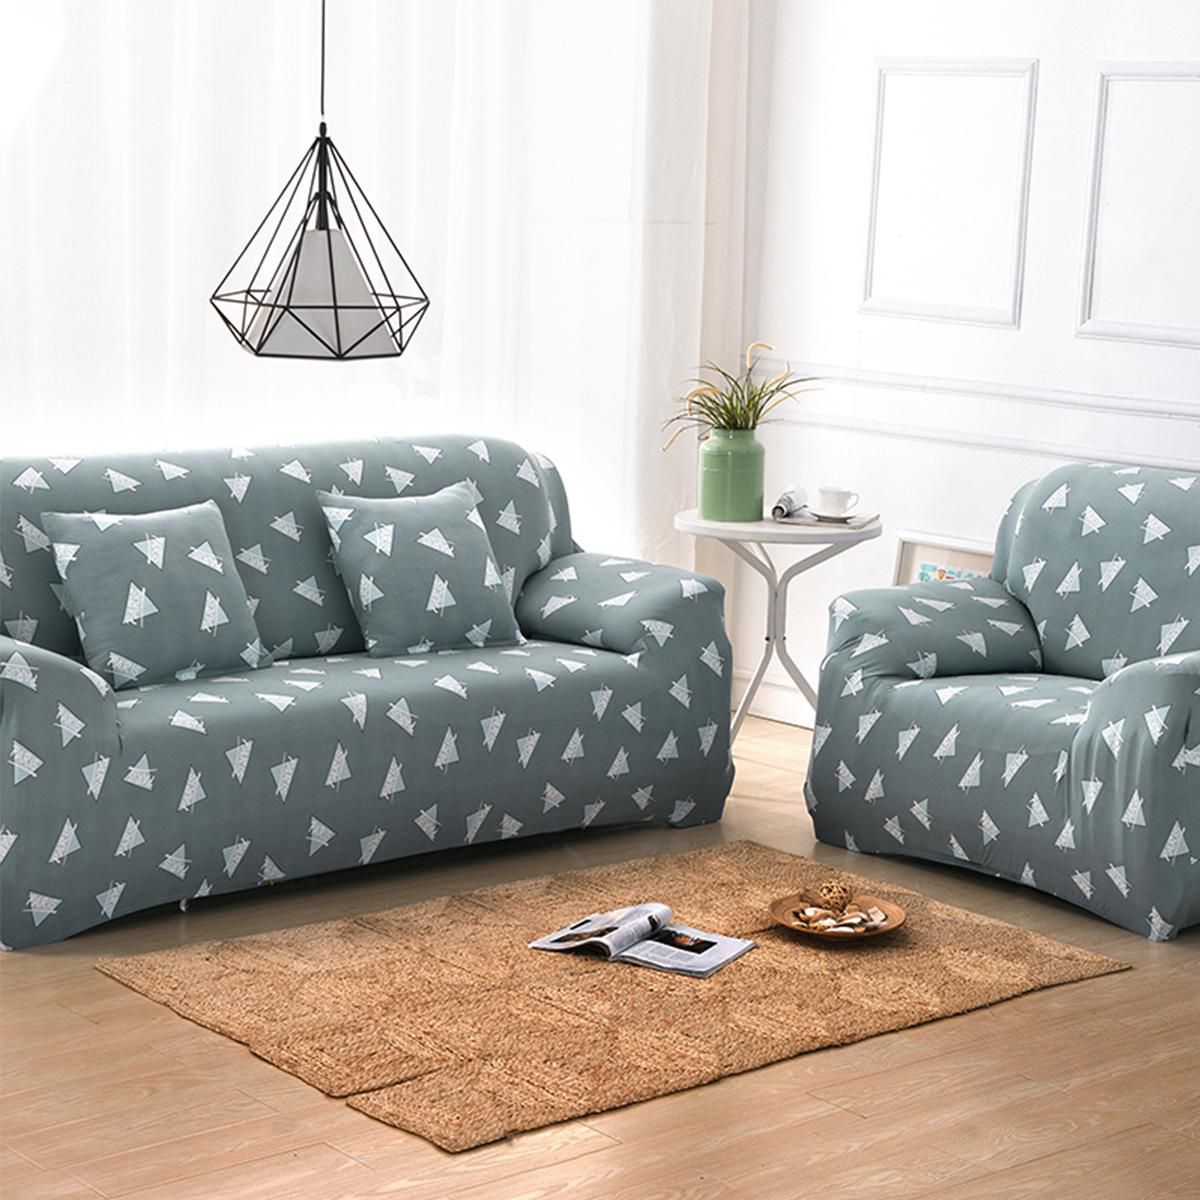 Stretch Sofa 1 2 3 4 Seater Protector Couch Slipcover L ...